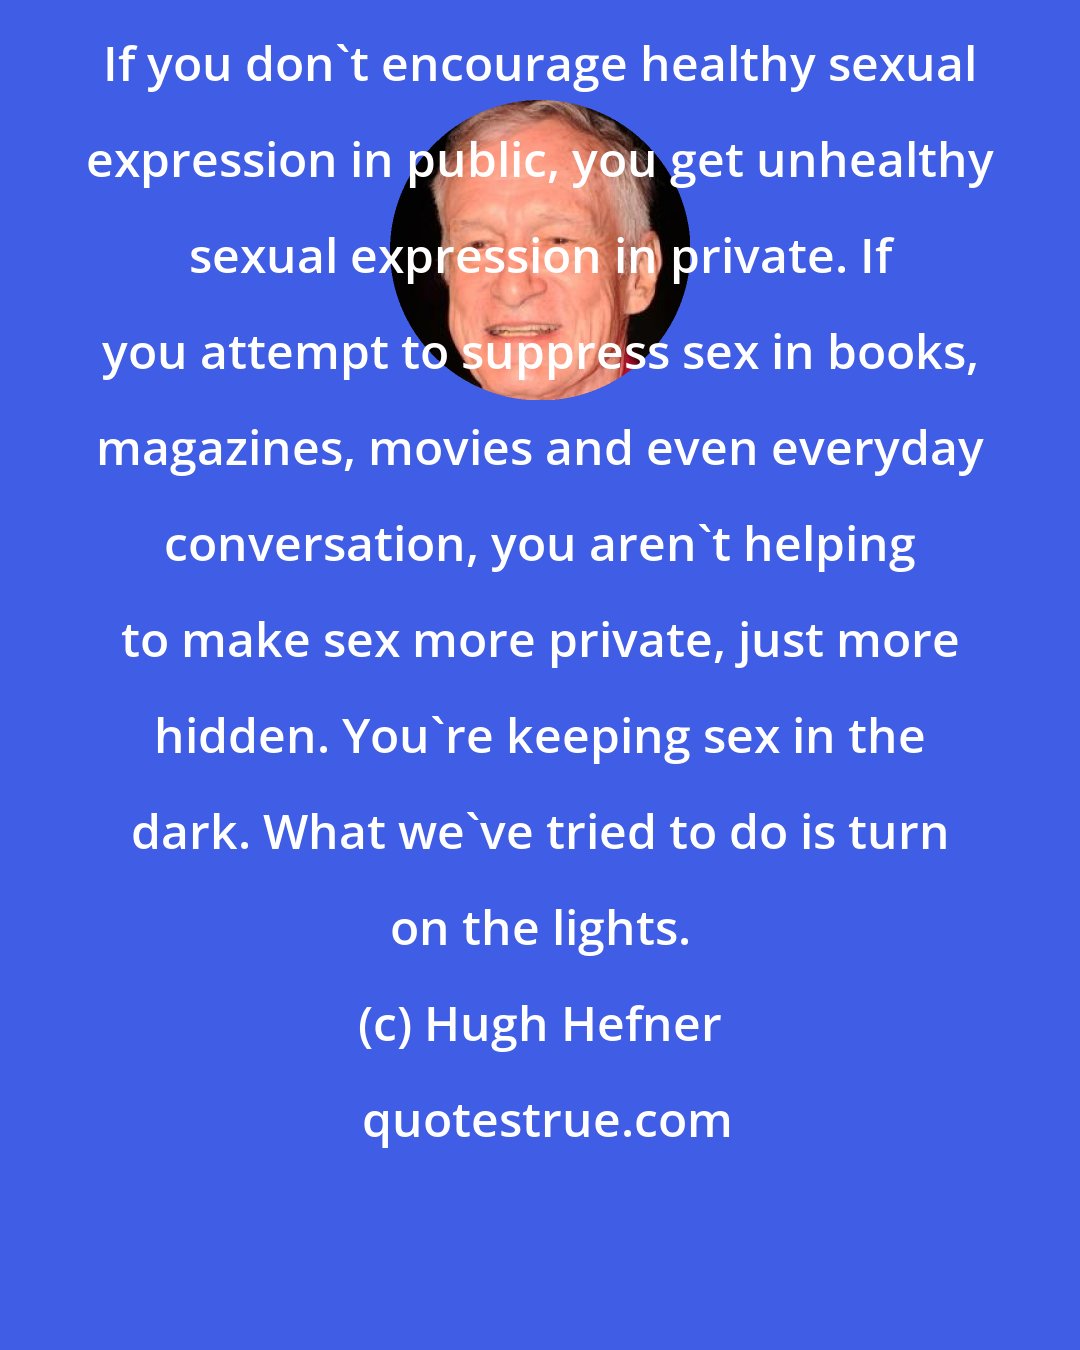 Hugh Hefner: If you don't encourage healthy sexual expression in public, you get unhealthy sexual expression in private. If you attempt to suppress sex in books, magazines, movies and even everyday conversation, you aren't helping to make sex more private, just more hidden. You're keeping sex in the dark. What we've tried to do is turn on the lights.